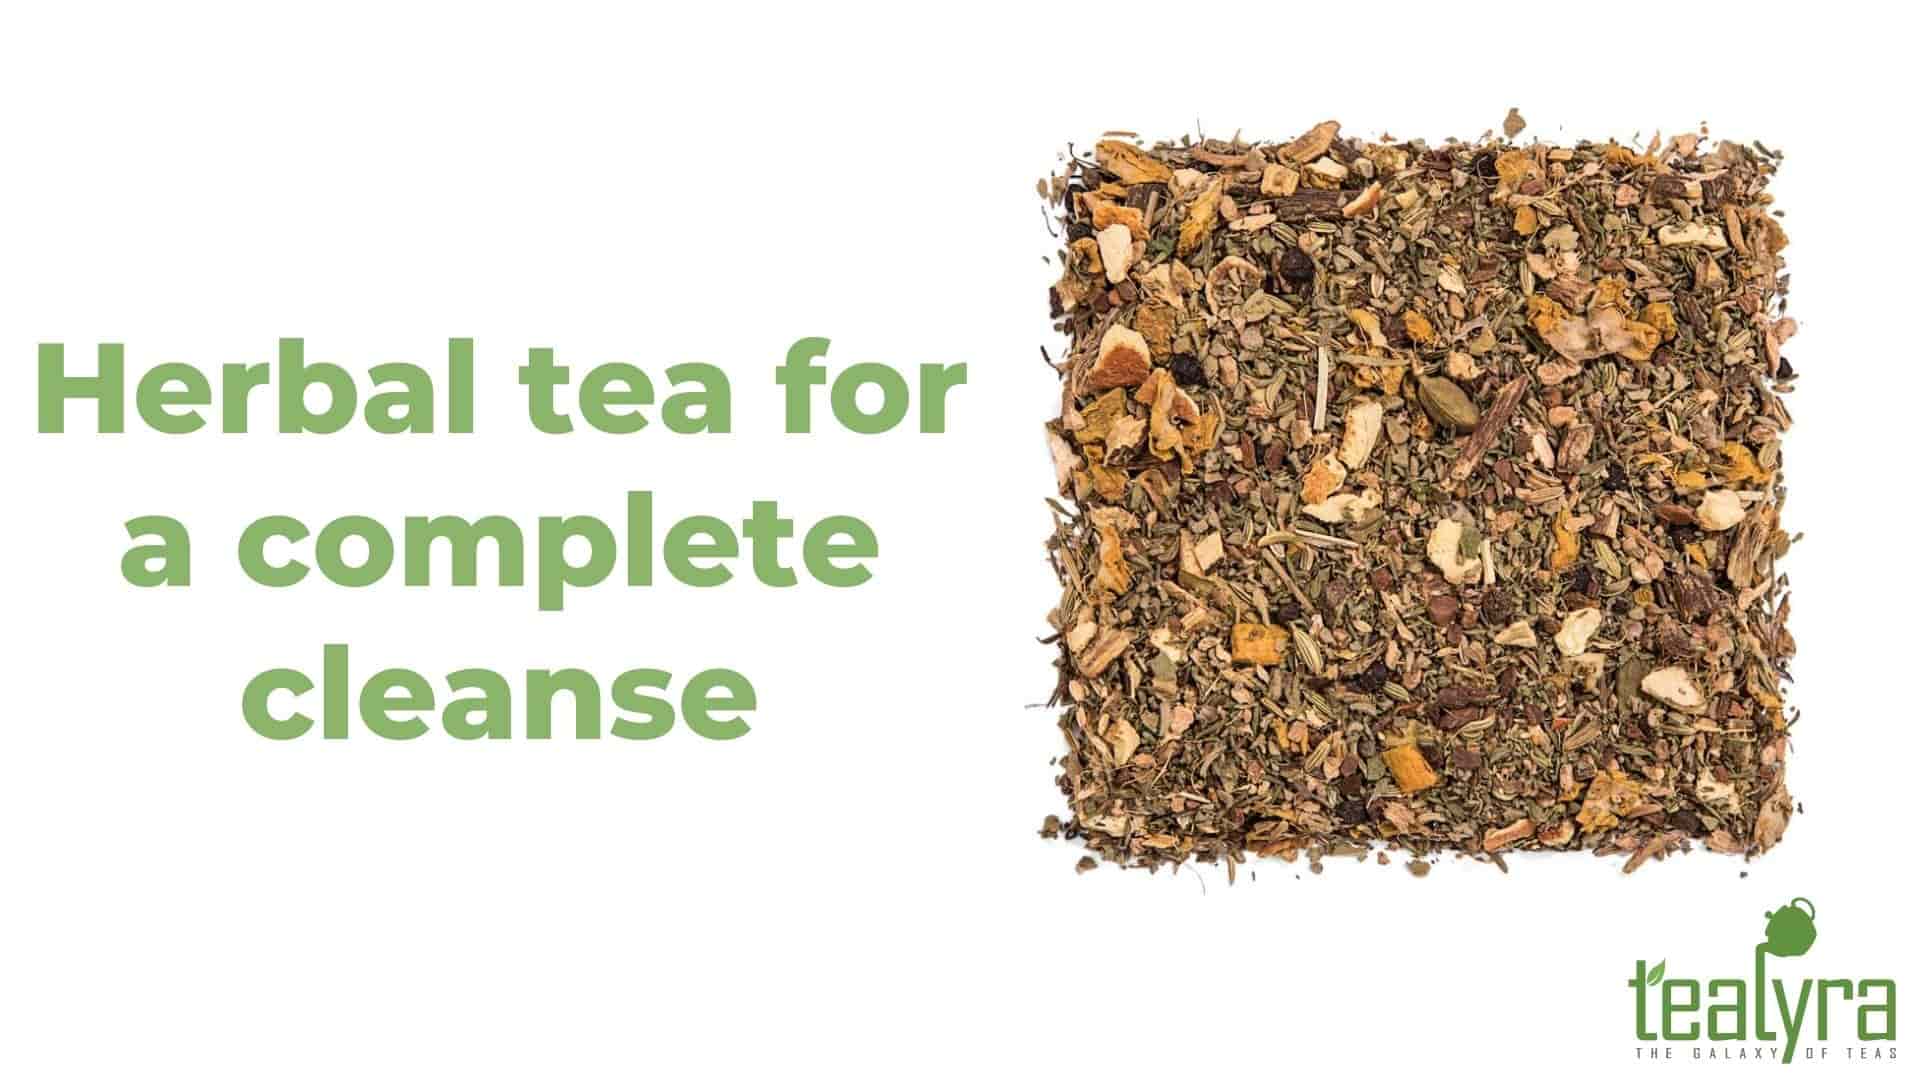 Image-herbal-tea-for-a-complete-cleanse